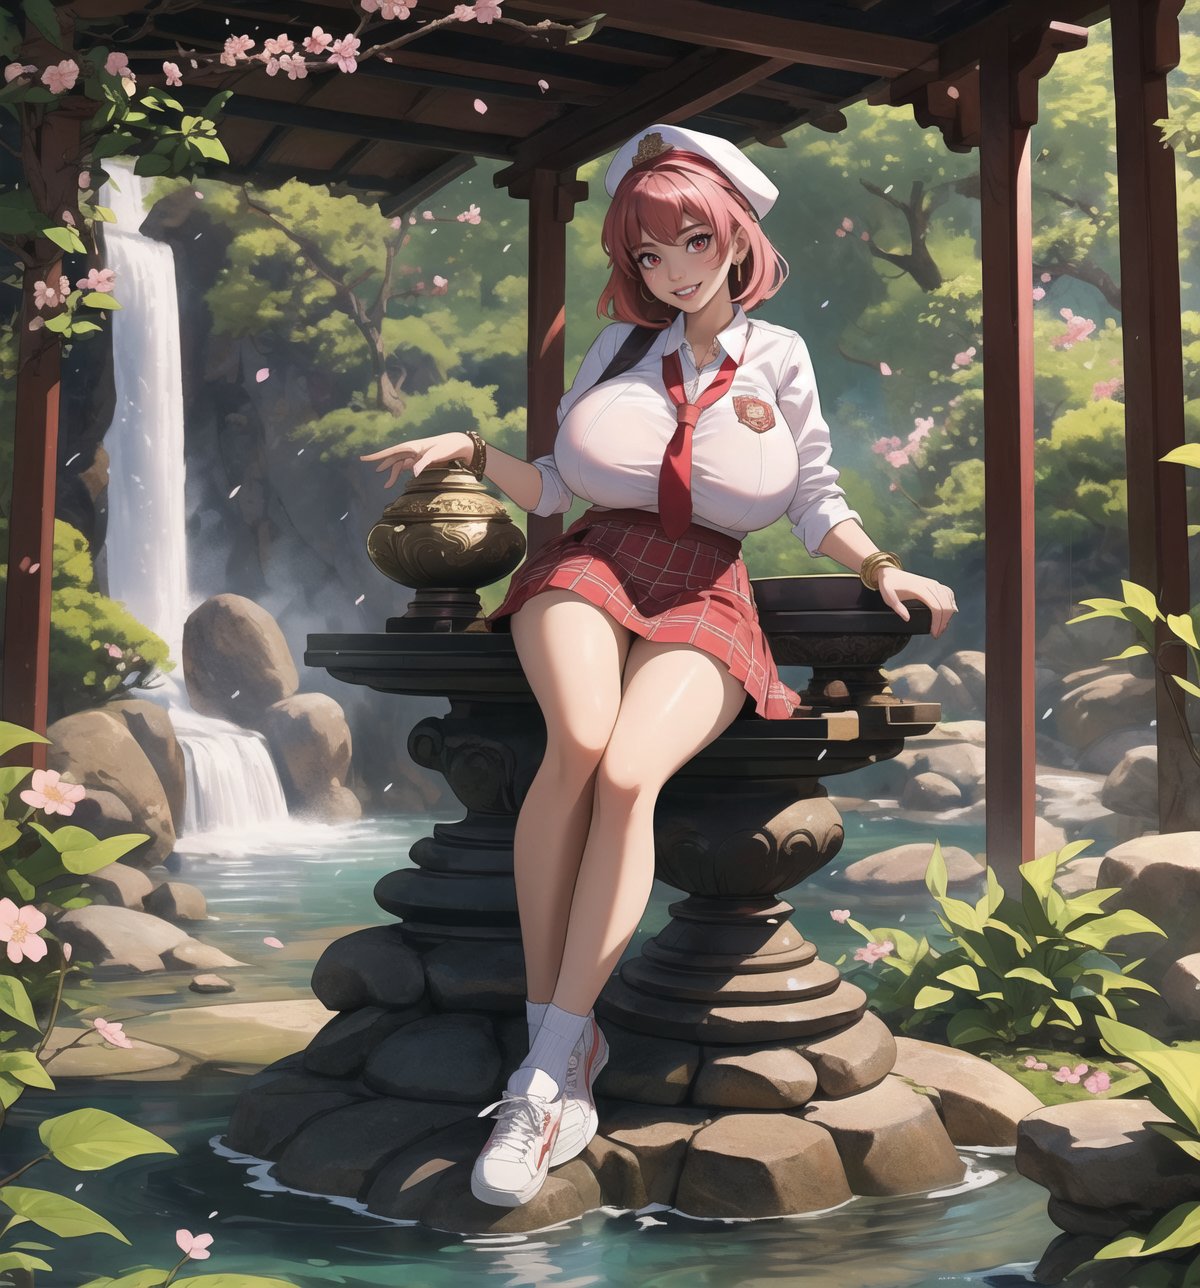 An ultra-detailed 16K masterpiece with mystical and enchanting styles, rendered in ultra-high resolution with realistic details. | Sakura, a young 23-year-old woman with huge breasts, is dressed in a schoolgirl uniform consisting of a white blouse, red and white plaid skirt, red tie and white sneakers. She also wears a white cap with the school emblem, gold cherry blossom earrings, red leather bracelets with metal details on the cuffs, and a red backpack. Her short pink hair is tousled in a modern, shaggy cut. Her red eyes are looking straight at the viewer, while she ((smiles and shows her teeth)), wearing bright red lipstick and war paint on her face. It is located in a temple in a waterfall with hot springs, with rock structures, wooden structures and an altar. The background of the scene shows tall, rugged mountains. It is raining heavily and the place is lit by lamps that create a mystical and enchanting atmosphere. | The image highlights Sakura's sensual figure and the temple's architectural elements. The rock and wooden structures, along with Sakura, the altar, the pillars and the mystical sculptures, create an enchanting and seductive environment. The lamps illuminate the scene, creating dramatic shadows and highlighting the details of the scene. | Soft, colorful lighting effects create a mystical and enchanting atmosphere, while rough, detailed textures on structures and costumes add realism to the image. | A sensual and enchanting scene of a young woman in a temple in a waterfall with hot springs, fusing elements of mystical and enchanting art. | (((The image reveals a full-body shot as Sakura assumes a sensual pose, engagingly leaning against a structure within the scene in an exciting manner. She takes on a sensual pose as she interacts, boldly leaning on a structure, leaning back and boldly throwing herself onto the structure, reclining back in an exhilarating way.))). | ((((full-body shot)))), ((perfect pose)), ((perfect limbs, perfect fingers, better hands, perfect hands, hands))++, ((perfect legs, perfect feet))++, ((huge breasts)), ((perfect design)), ((perfect composition)), ((very detailed scene, very detailed background, perfect layout, correct imperfections)), Enhance++, Ultra details++, More Detail++